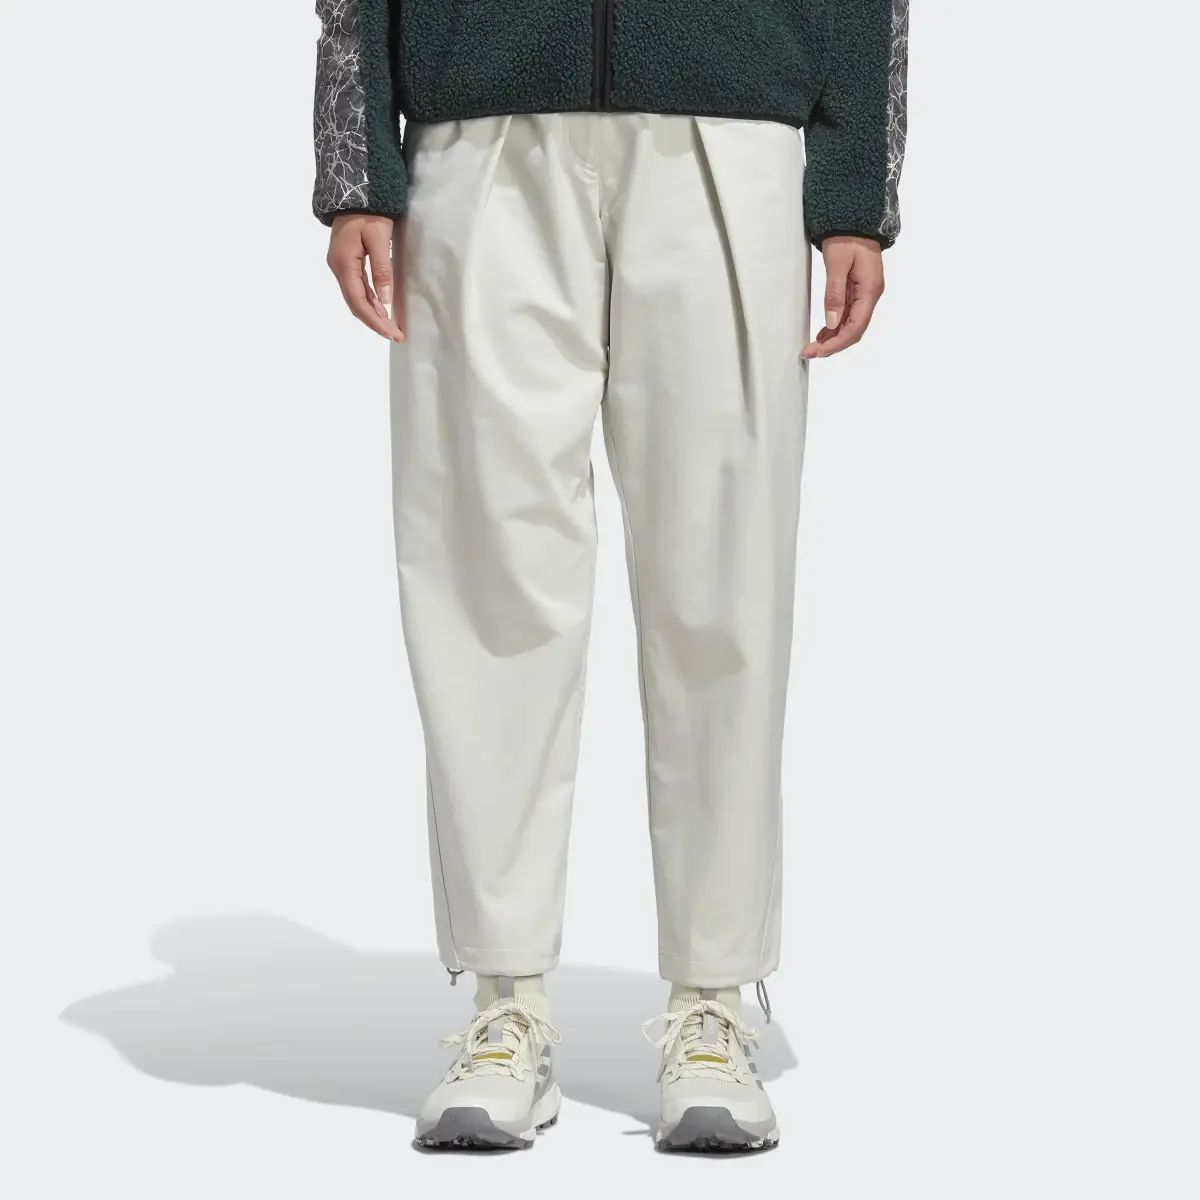 Adidas Terrex x and wander Trousers. 1